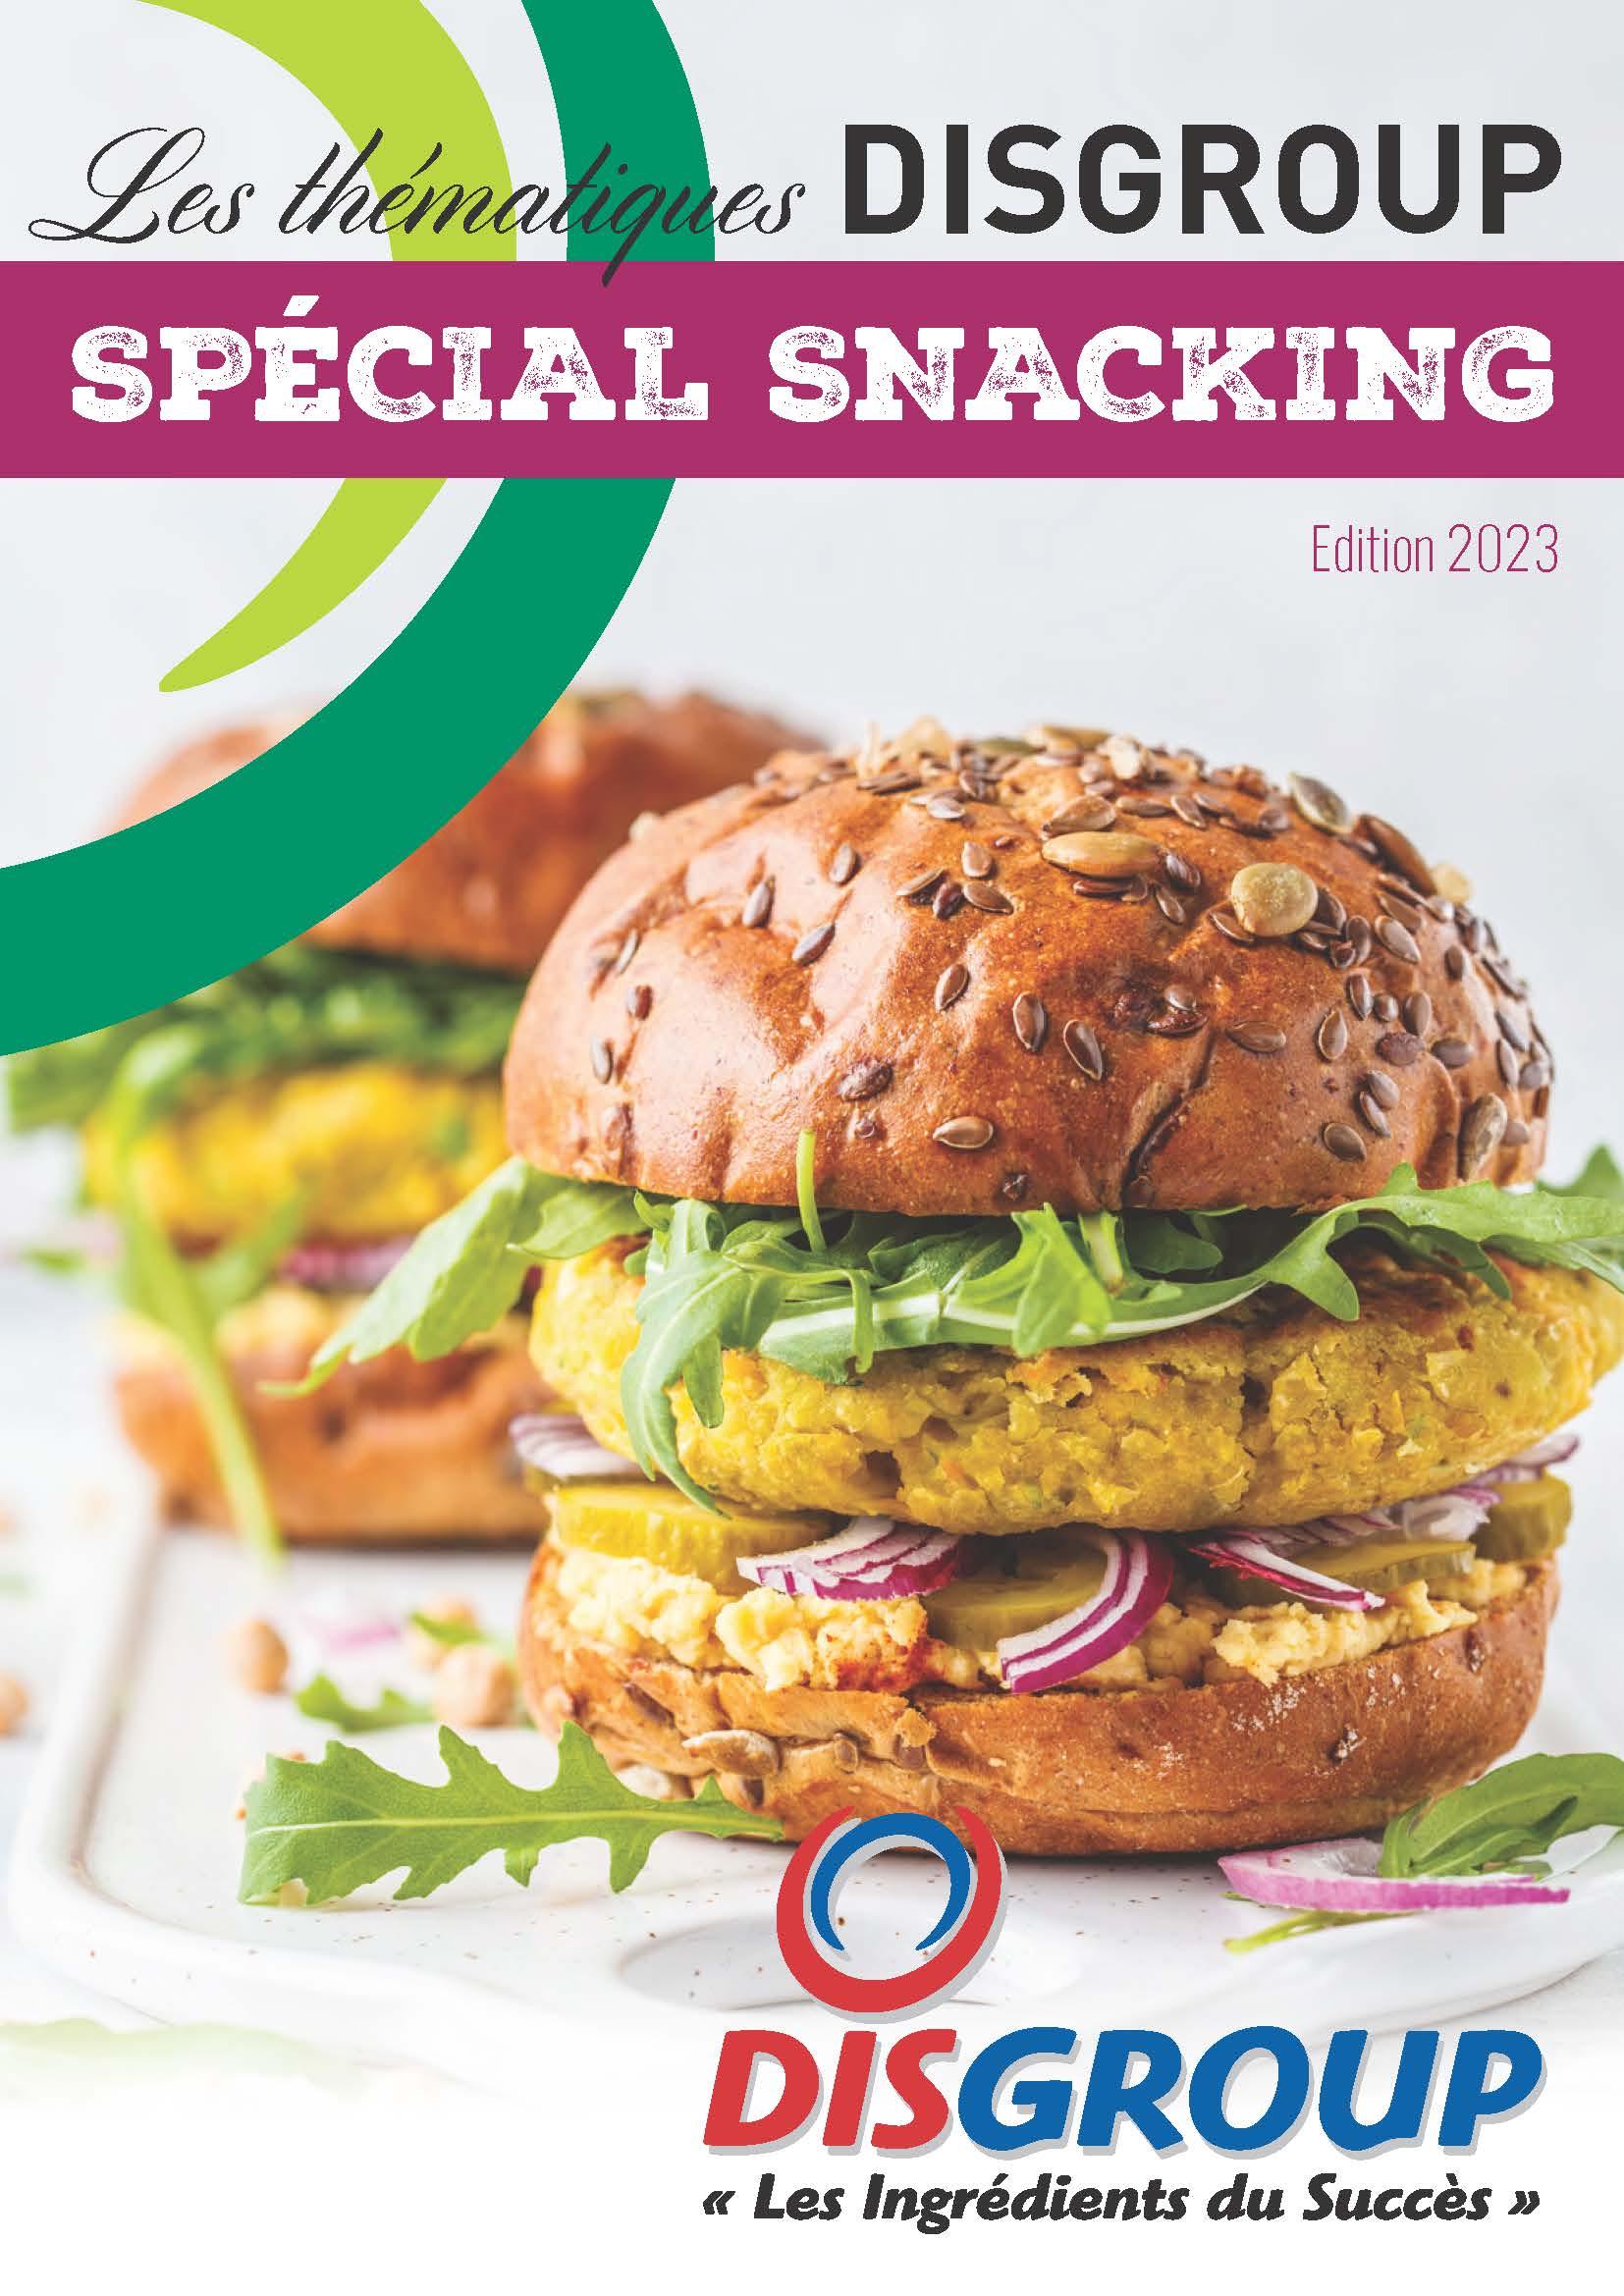 Catalogue thematique special SNACKING 2023